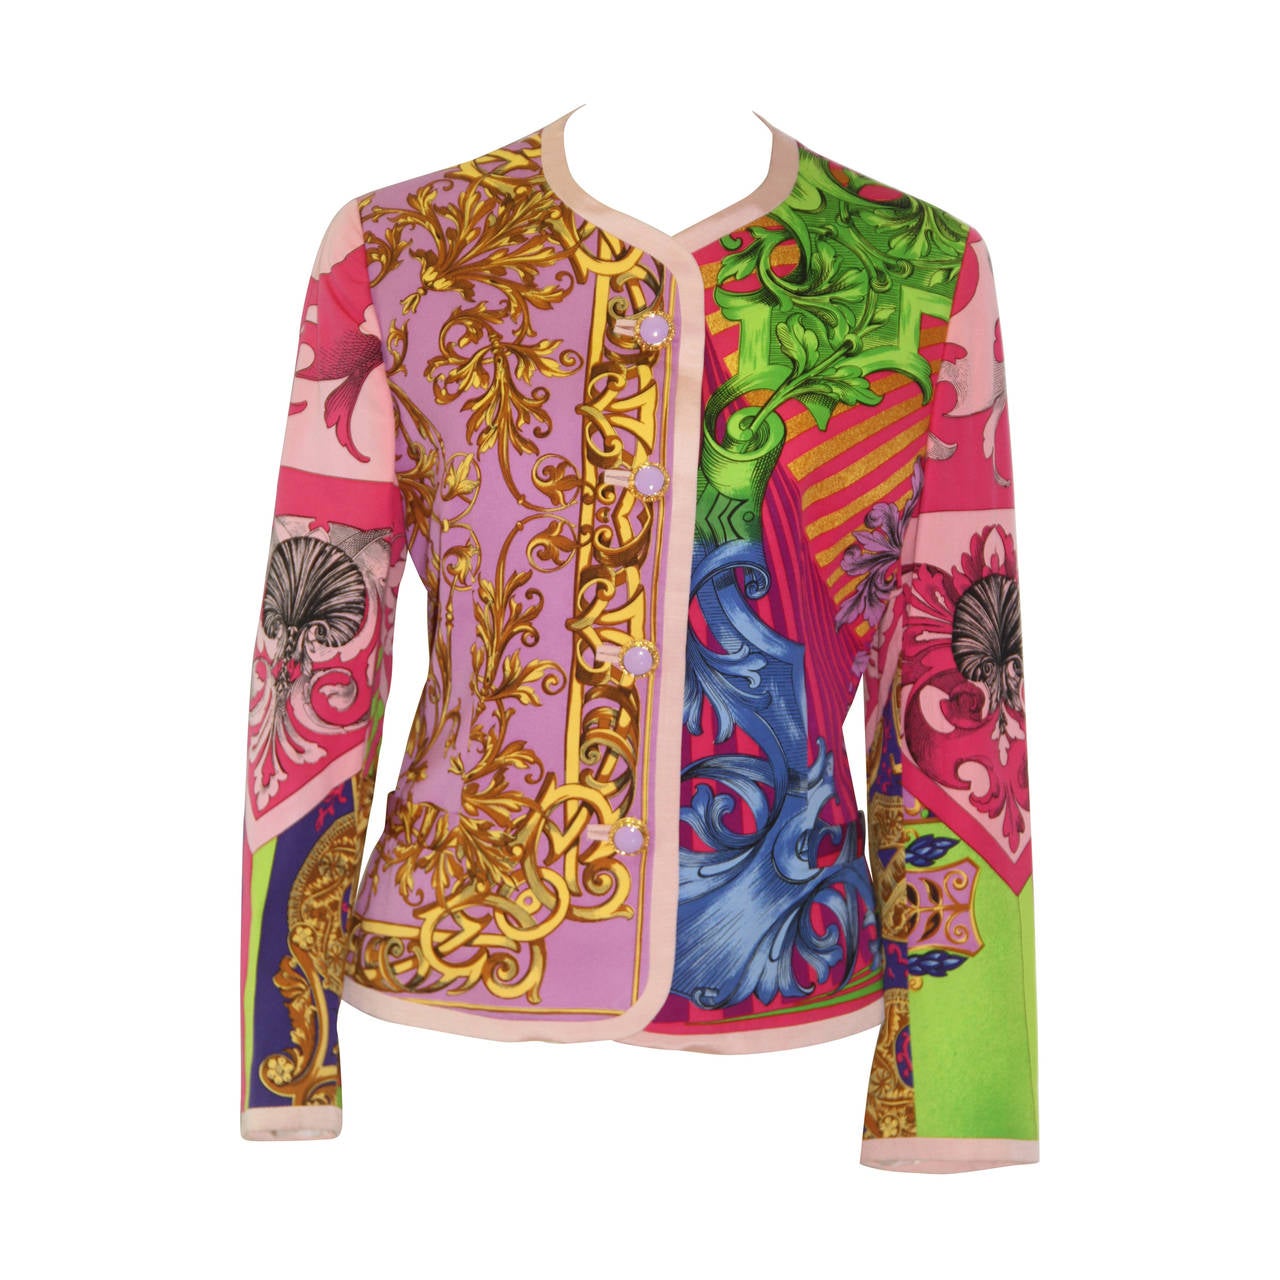 Gianni Versace Seashell Baroque Printed Jacket Spring 1992 For Sale